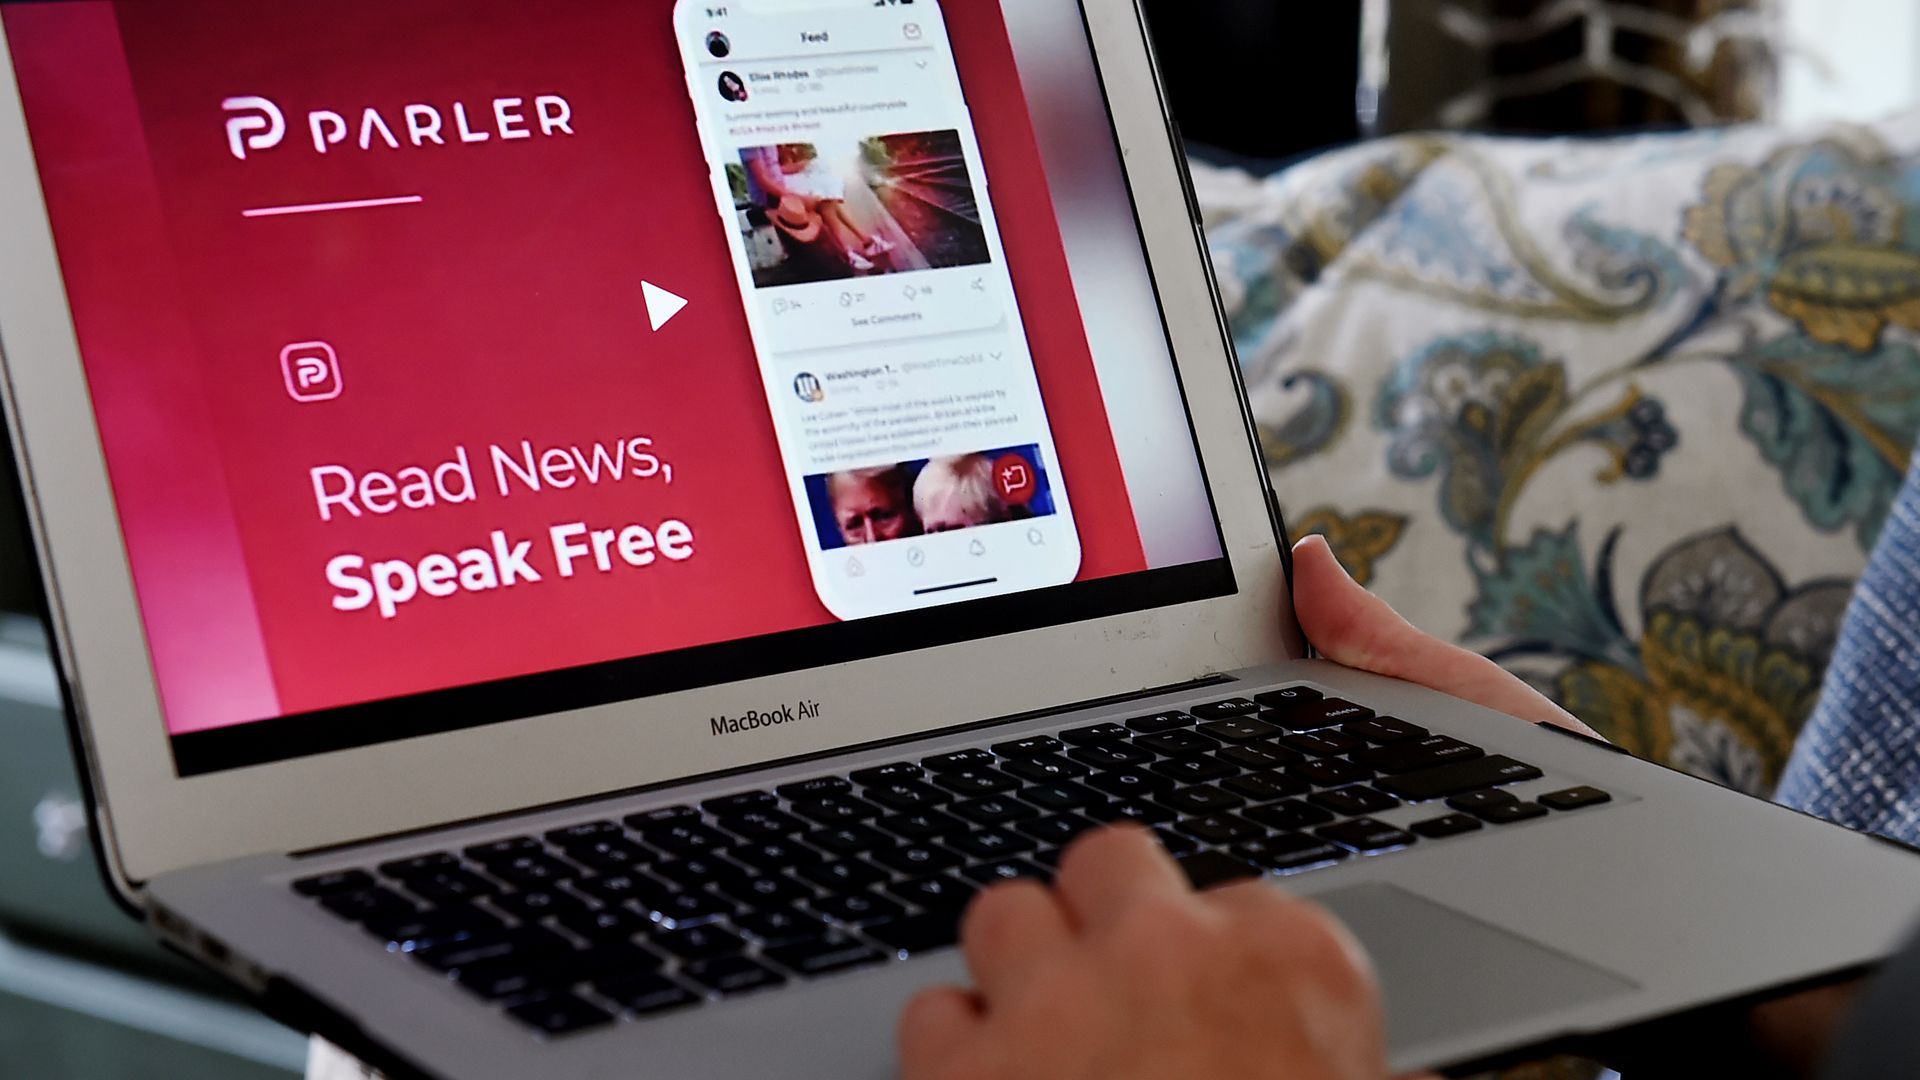 Photo of two hands holding up a laptop with a Parler ad on the screen